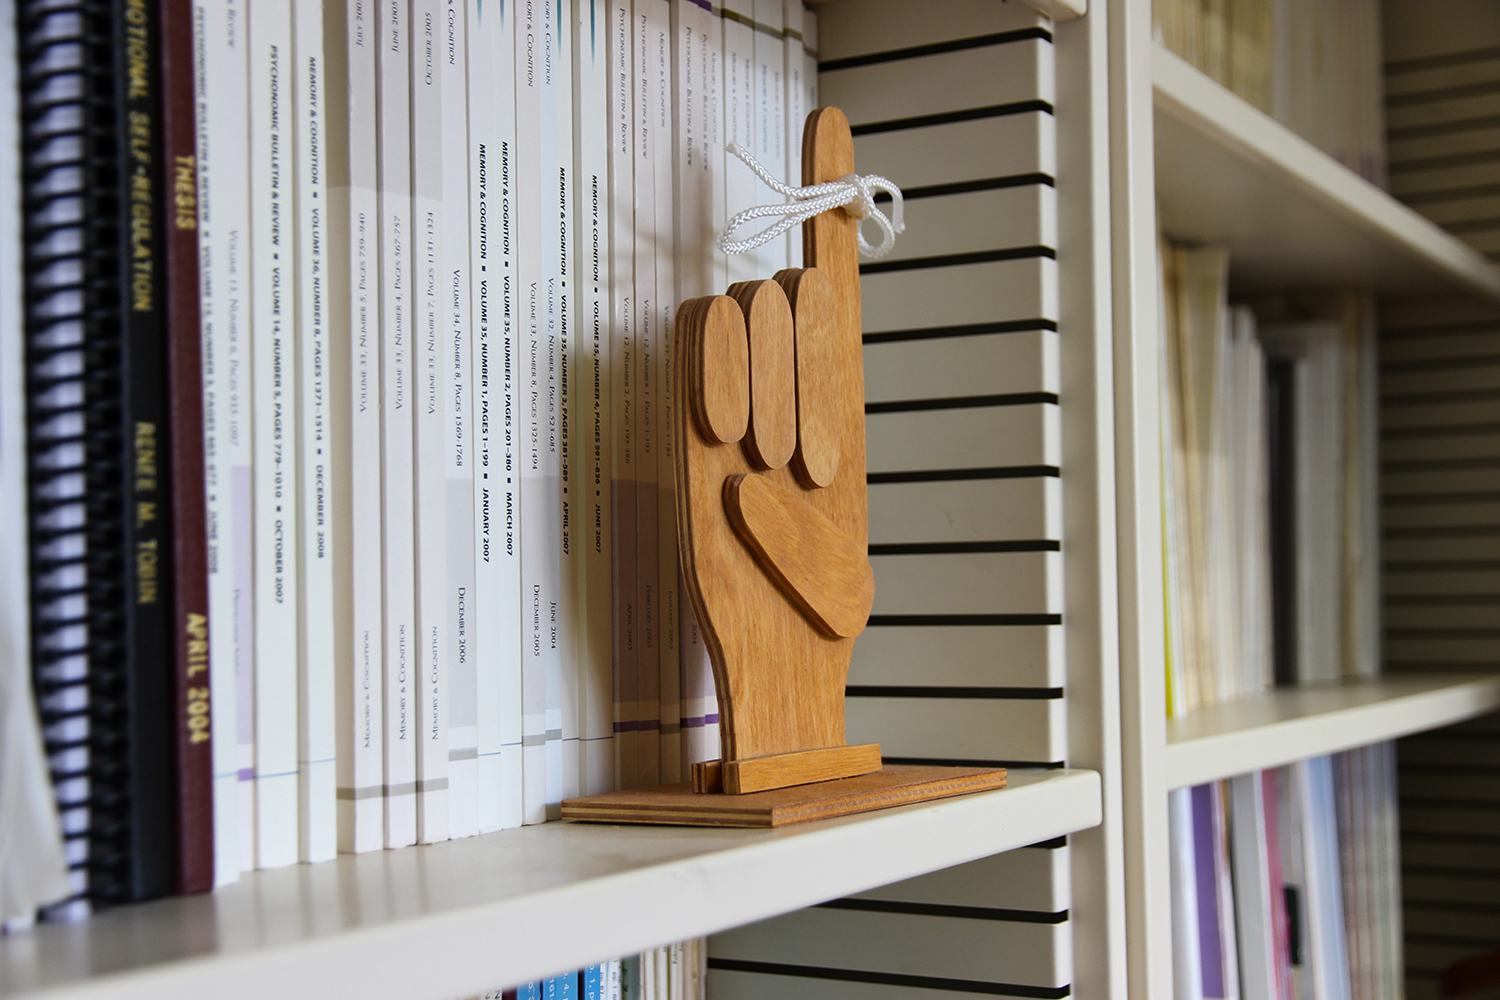 Wooden figurine of a hand on a bookshelf featuring a white string tied around the upward-pointing index finger to signify memory